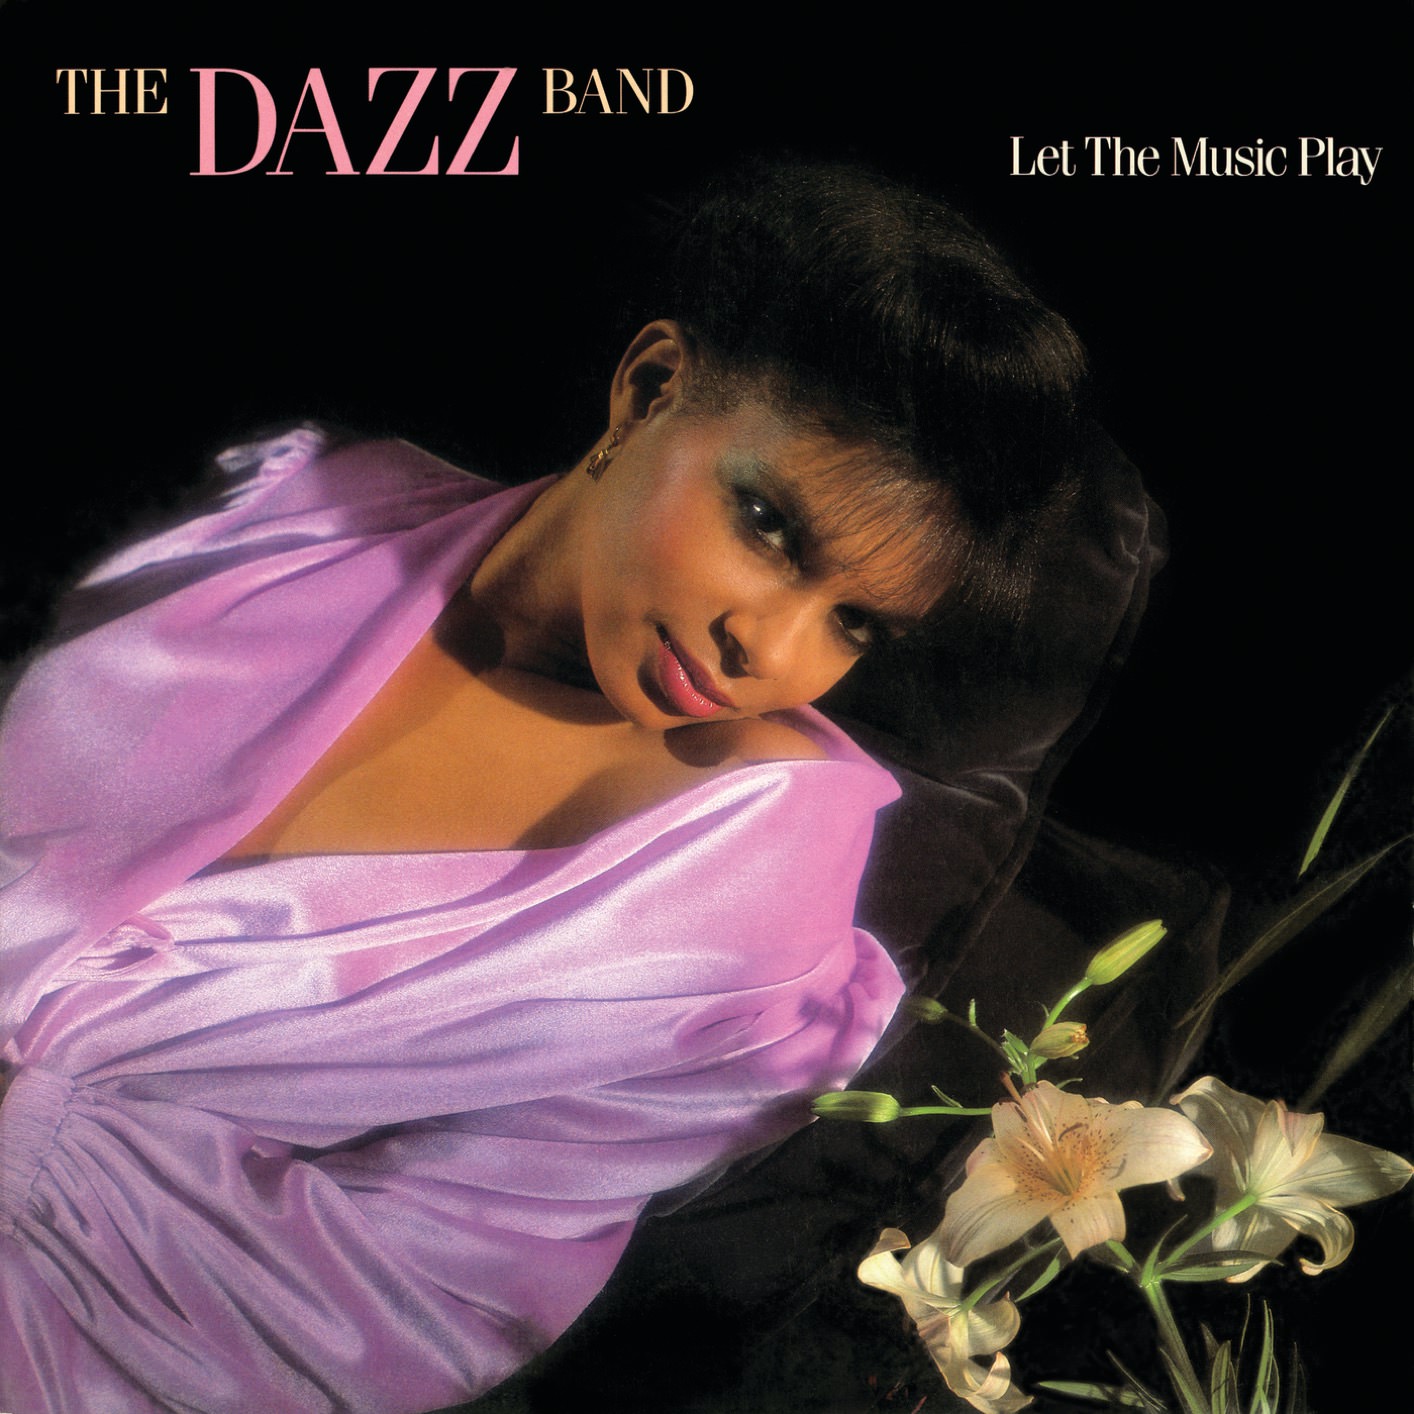 The Dazz Band - Let The Music Play (1981/2018) [FLAC 24bit/96kHz]